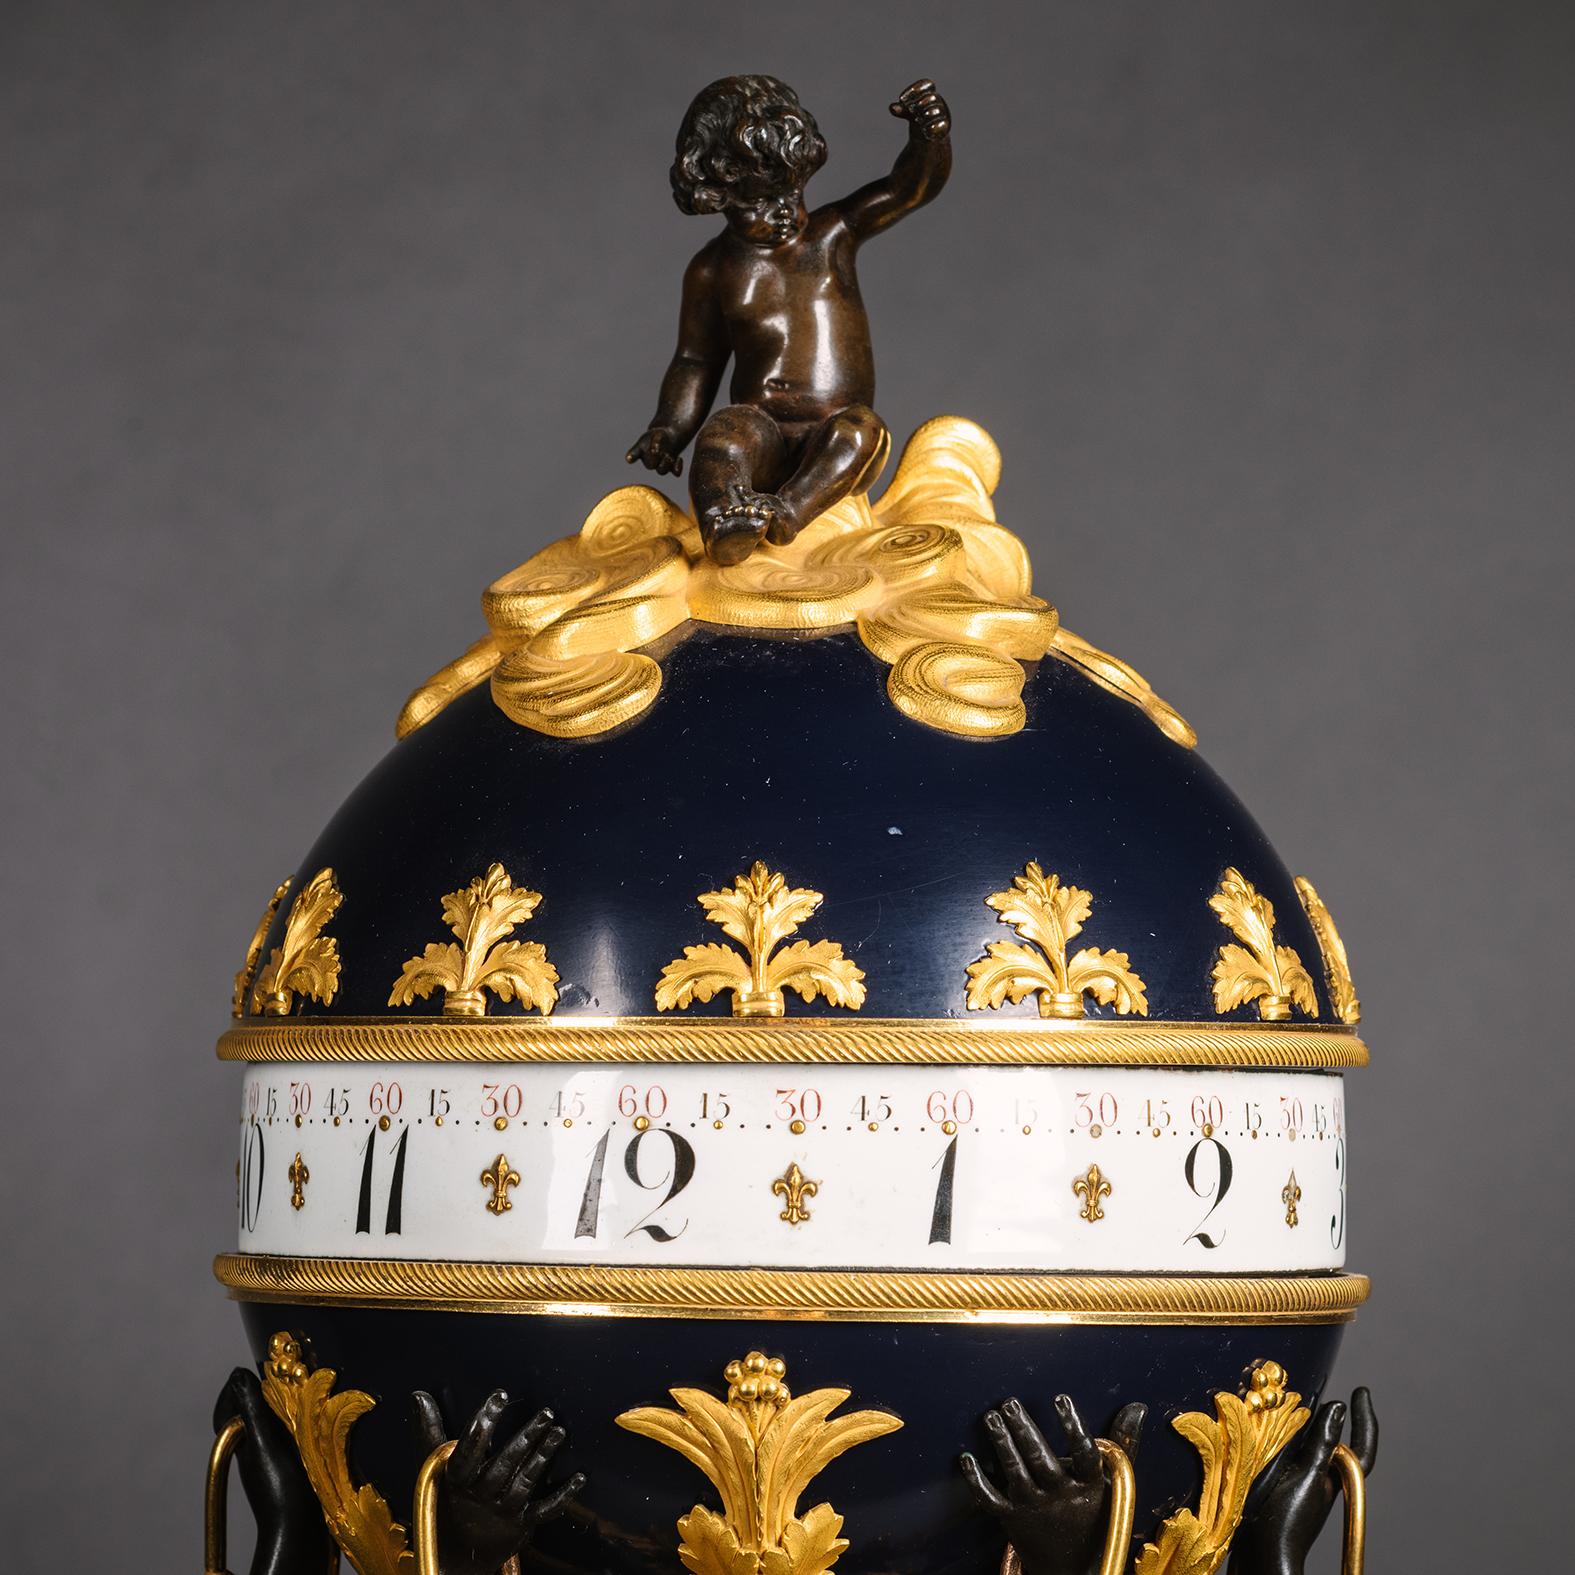 A Louis XVI Style Gilt and Patinated Bronze and Marble Three Graces Spherical Clock. By Emmanuel-Alfred (Dit Alfred II) Beurdeley. 

Modelled in bronze with the Three Graces holding flower chains and aloft a sphere surmounted by a cloudborne figure